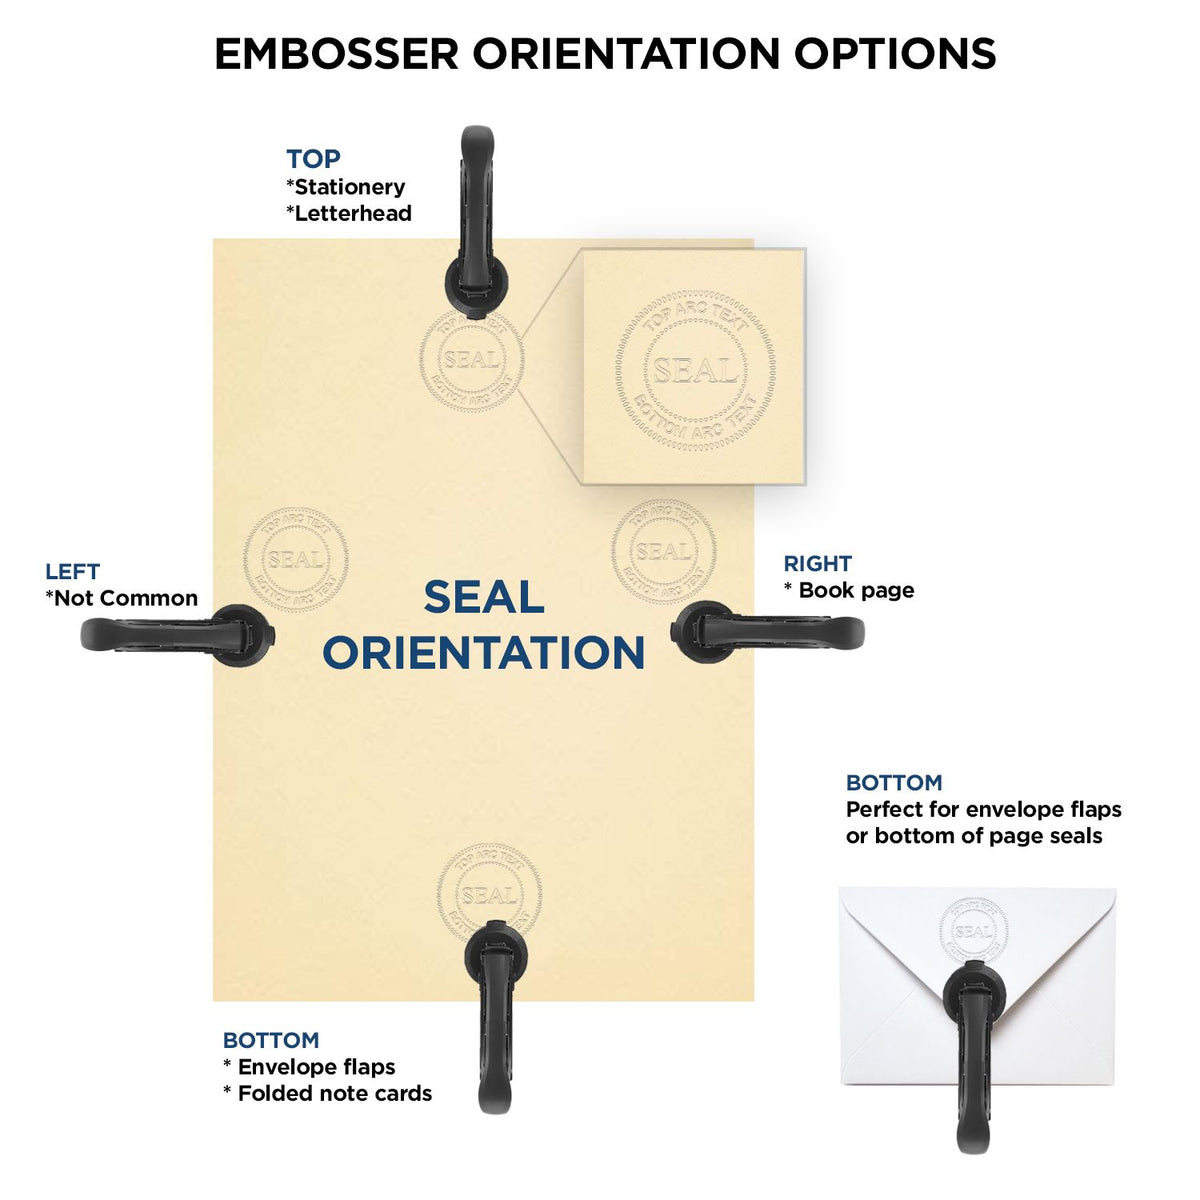 An infographic for the Handheld Indiana Land Surveyor Seal showing embosser orientation, this is showing examples of a top, bottom, right and left insert.